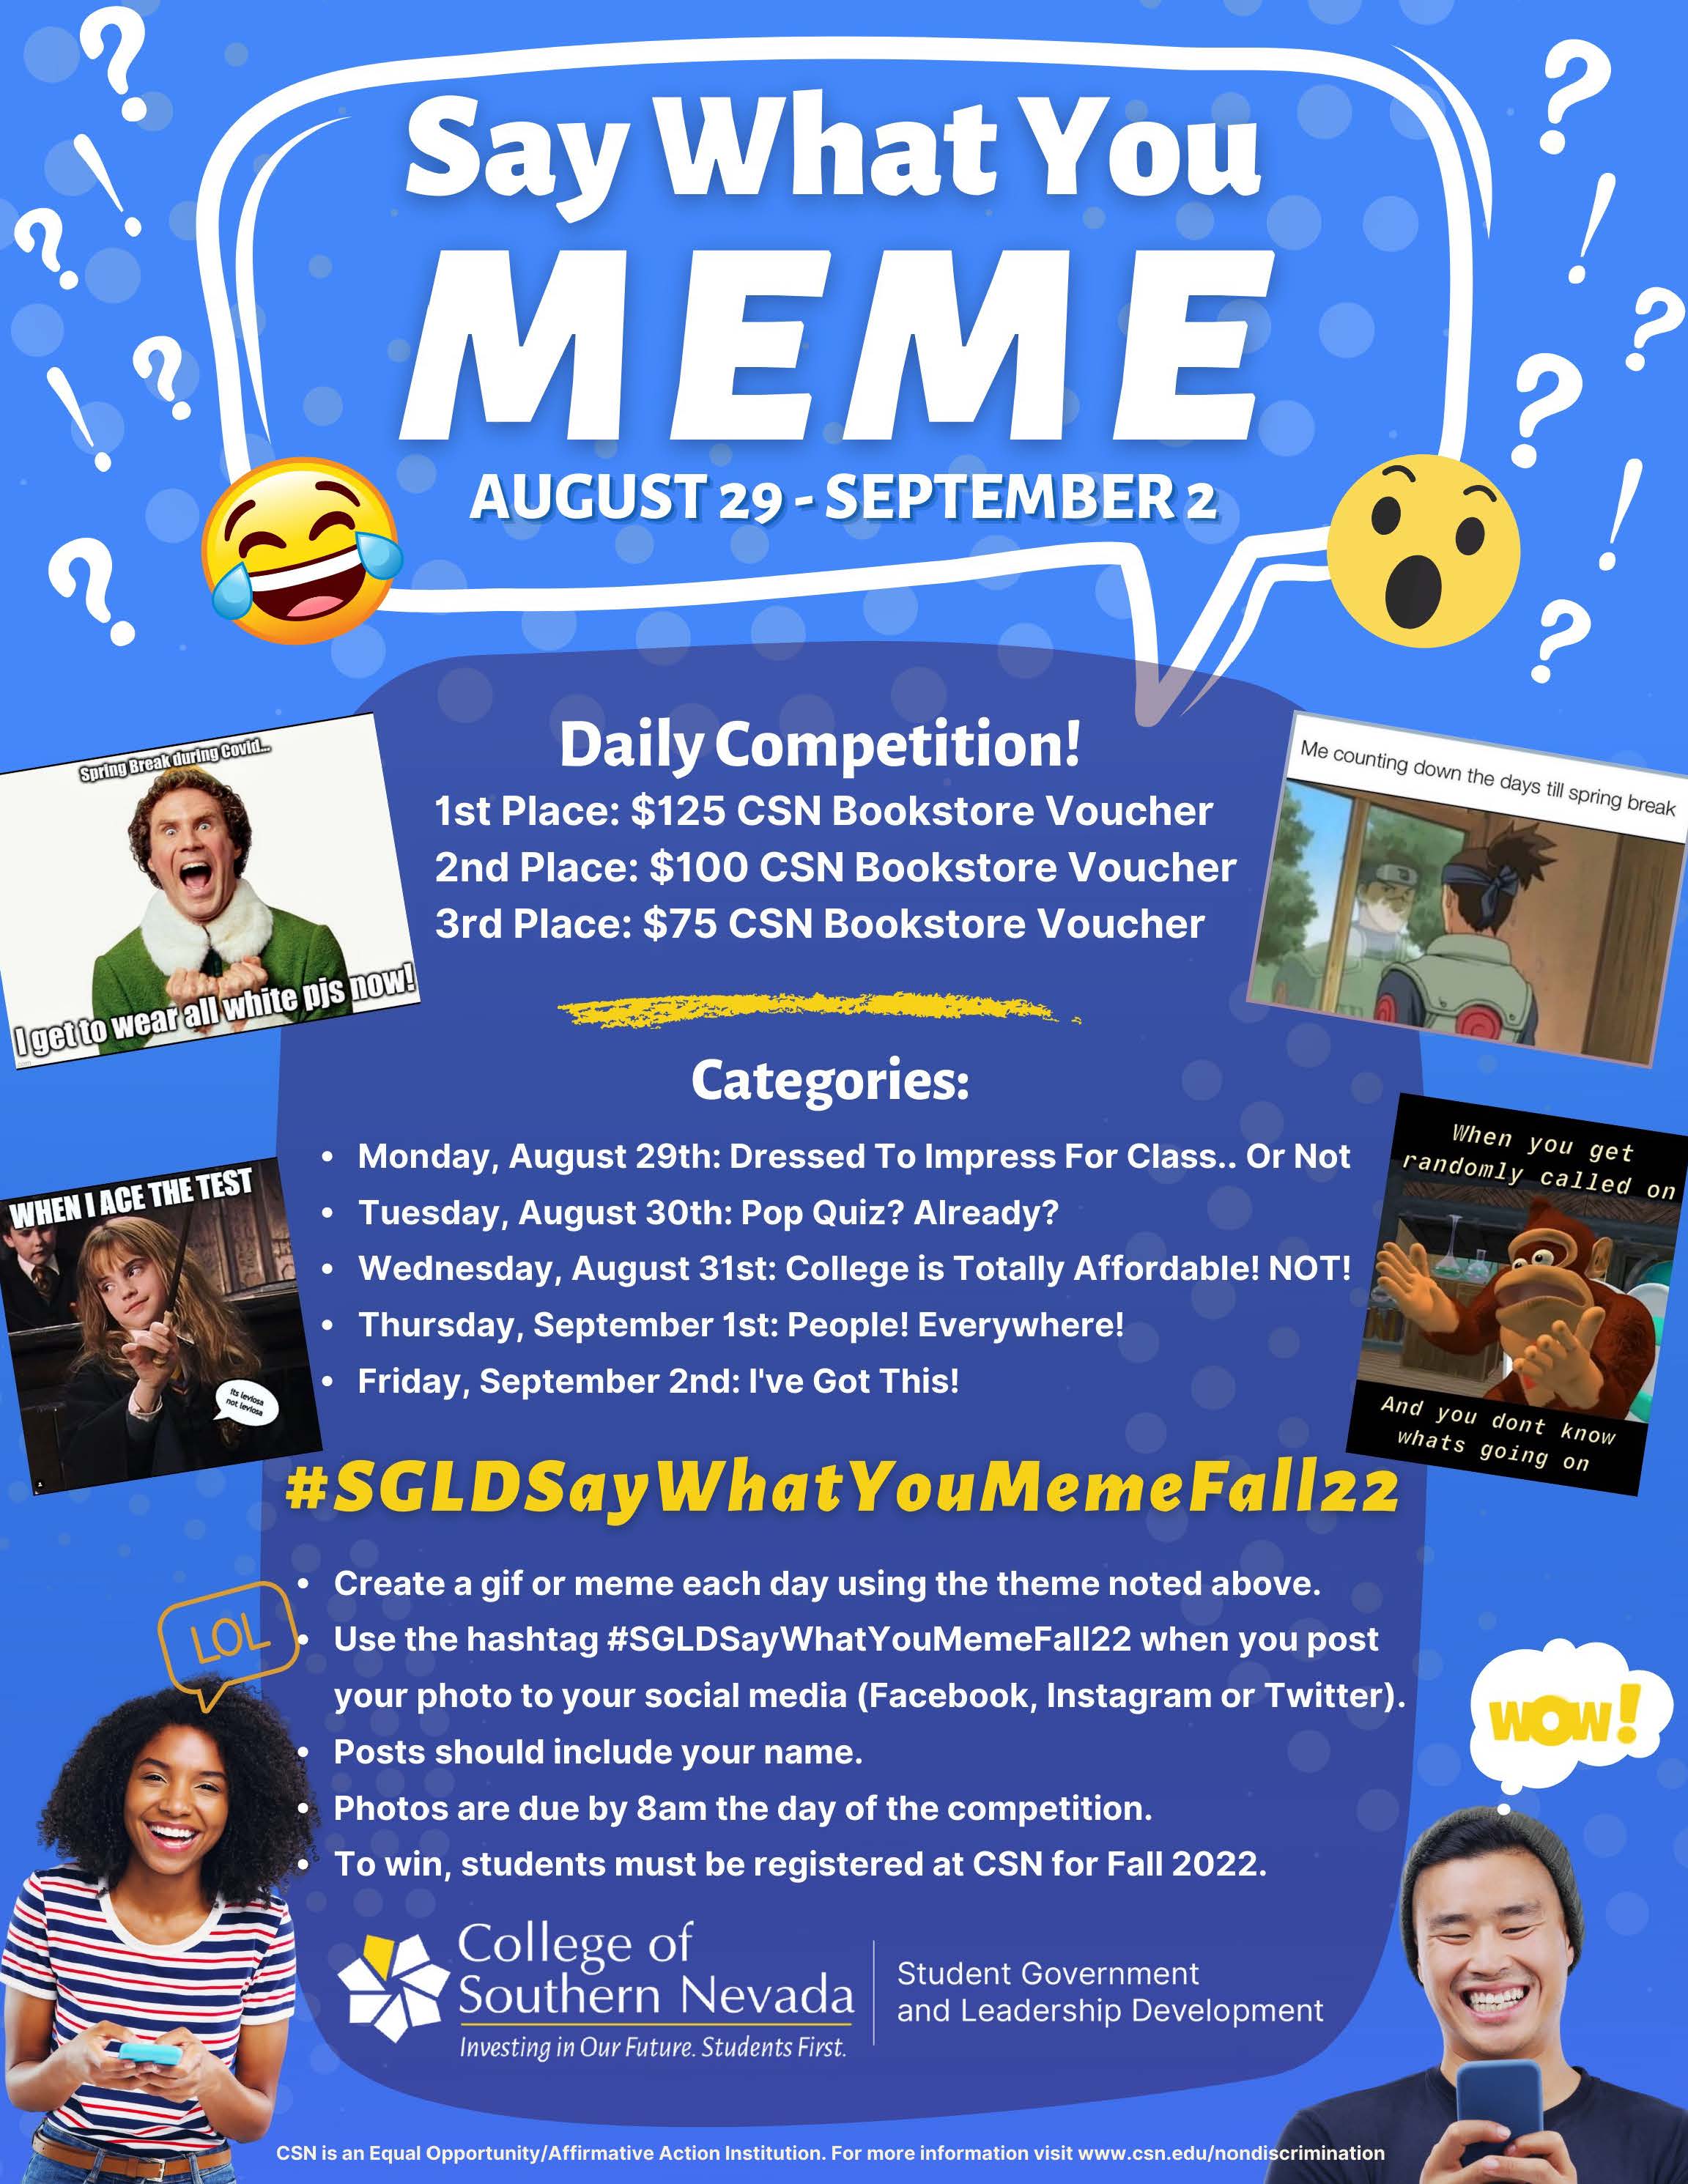 Say what you meme fall 2022 event flyer 